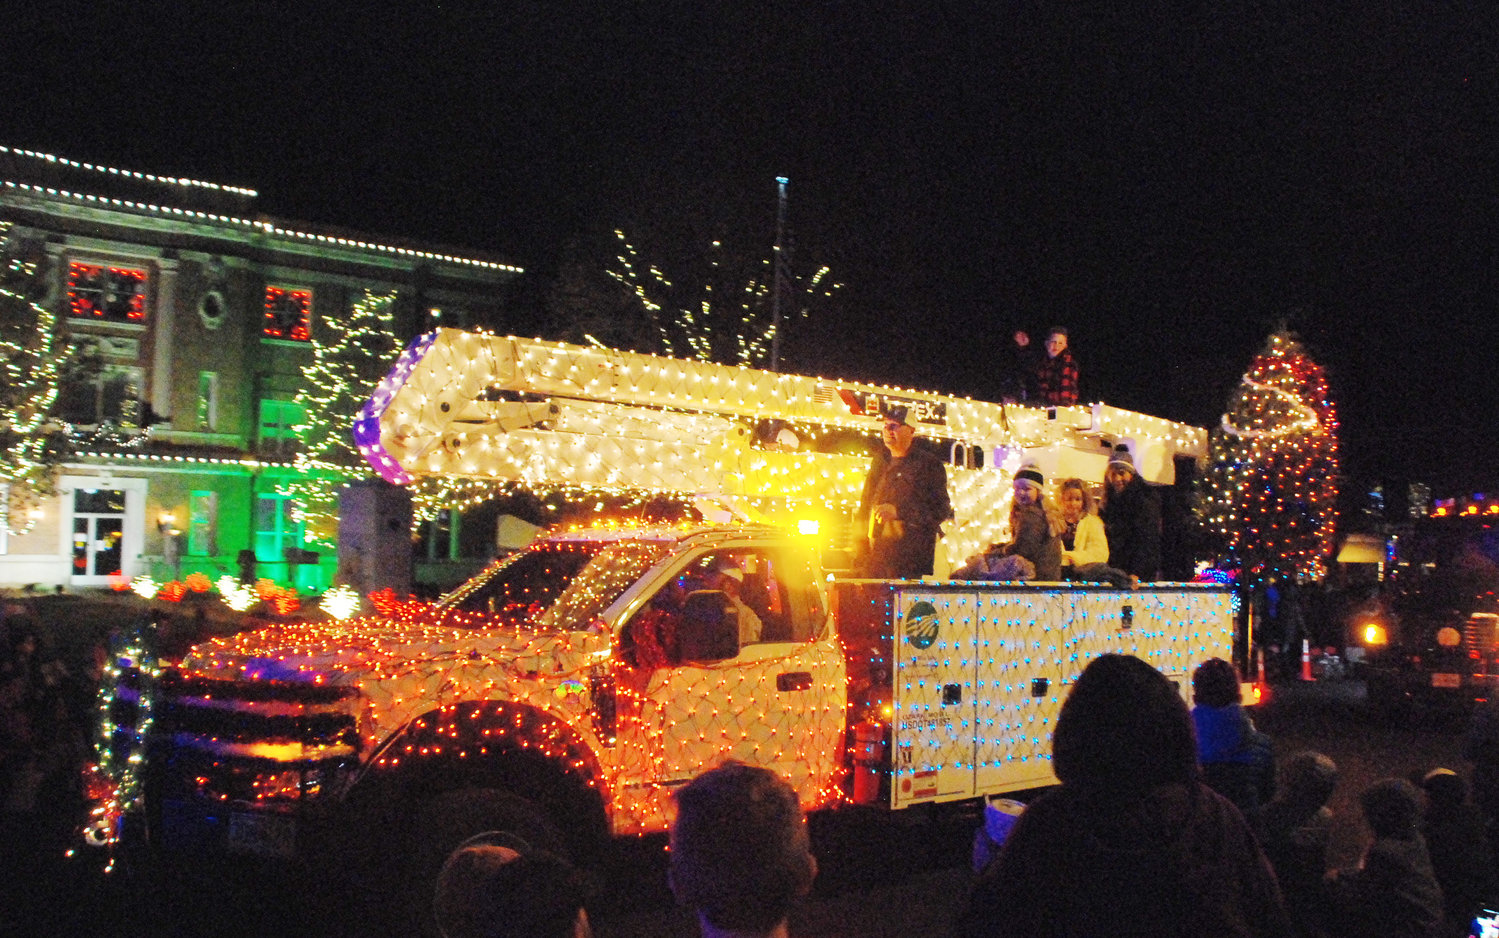 WHITE RIVER VALLEY ELECTRIC COOPERATIVE lit up a bucket truck for the 2021 Ozark Christmas Parade.